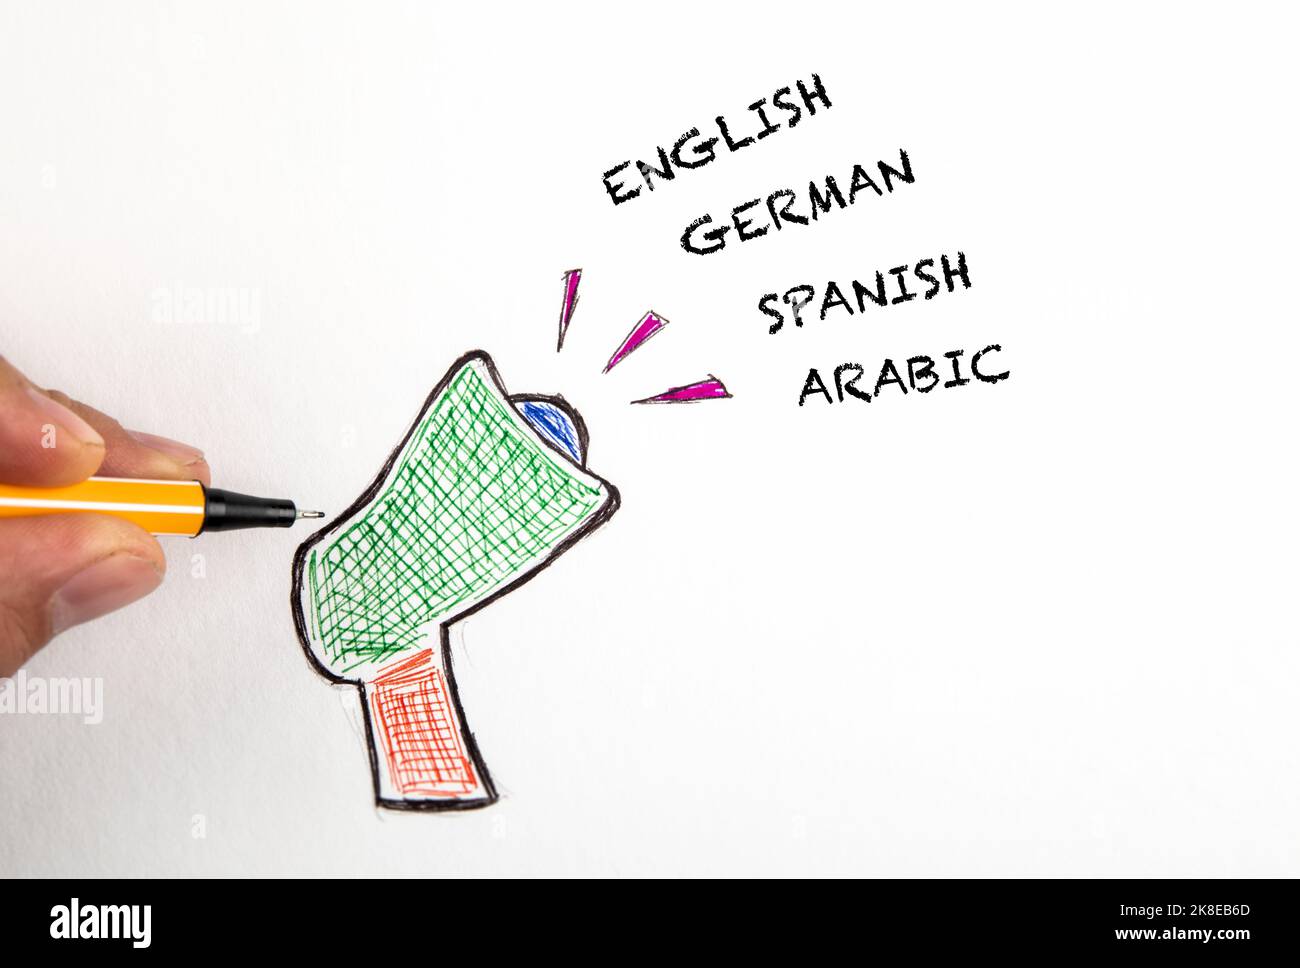 IN ENGLISH GERMAN SPANISH ARABIC. Concept of language learning and skills. Stock Photo